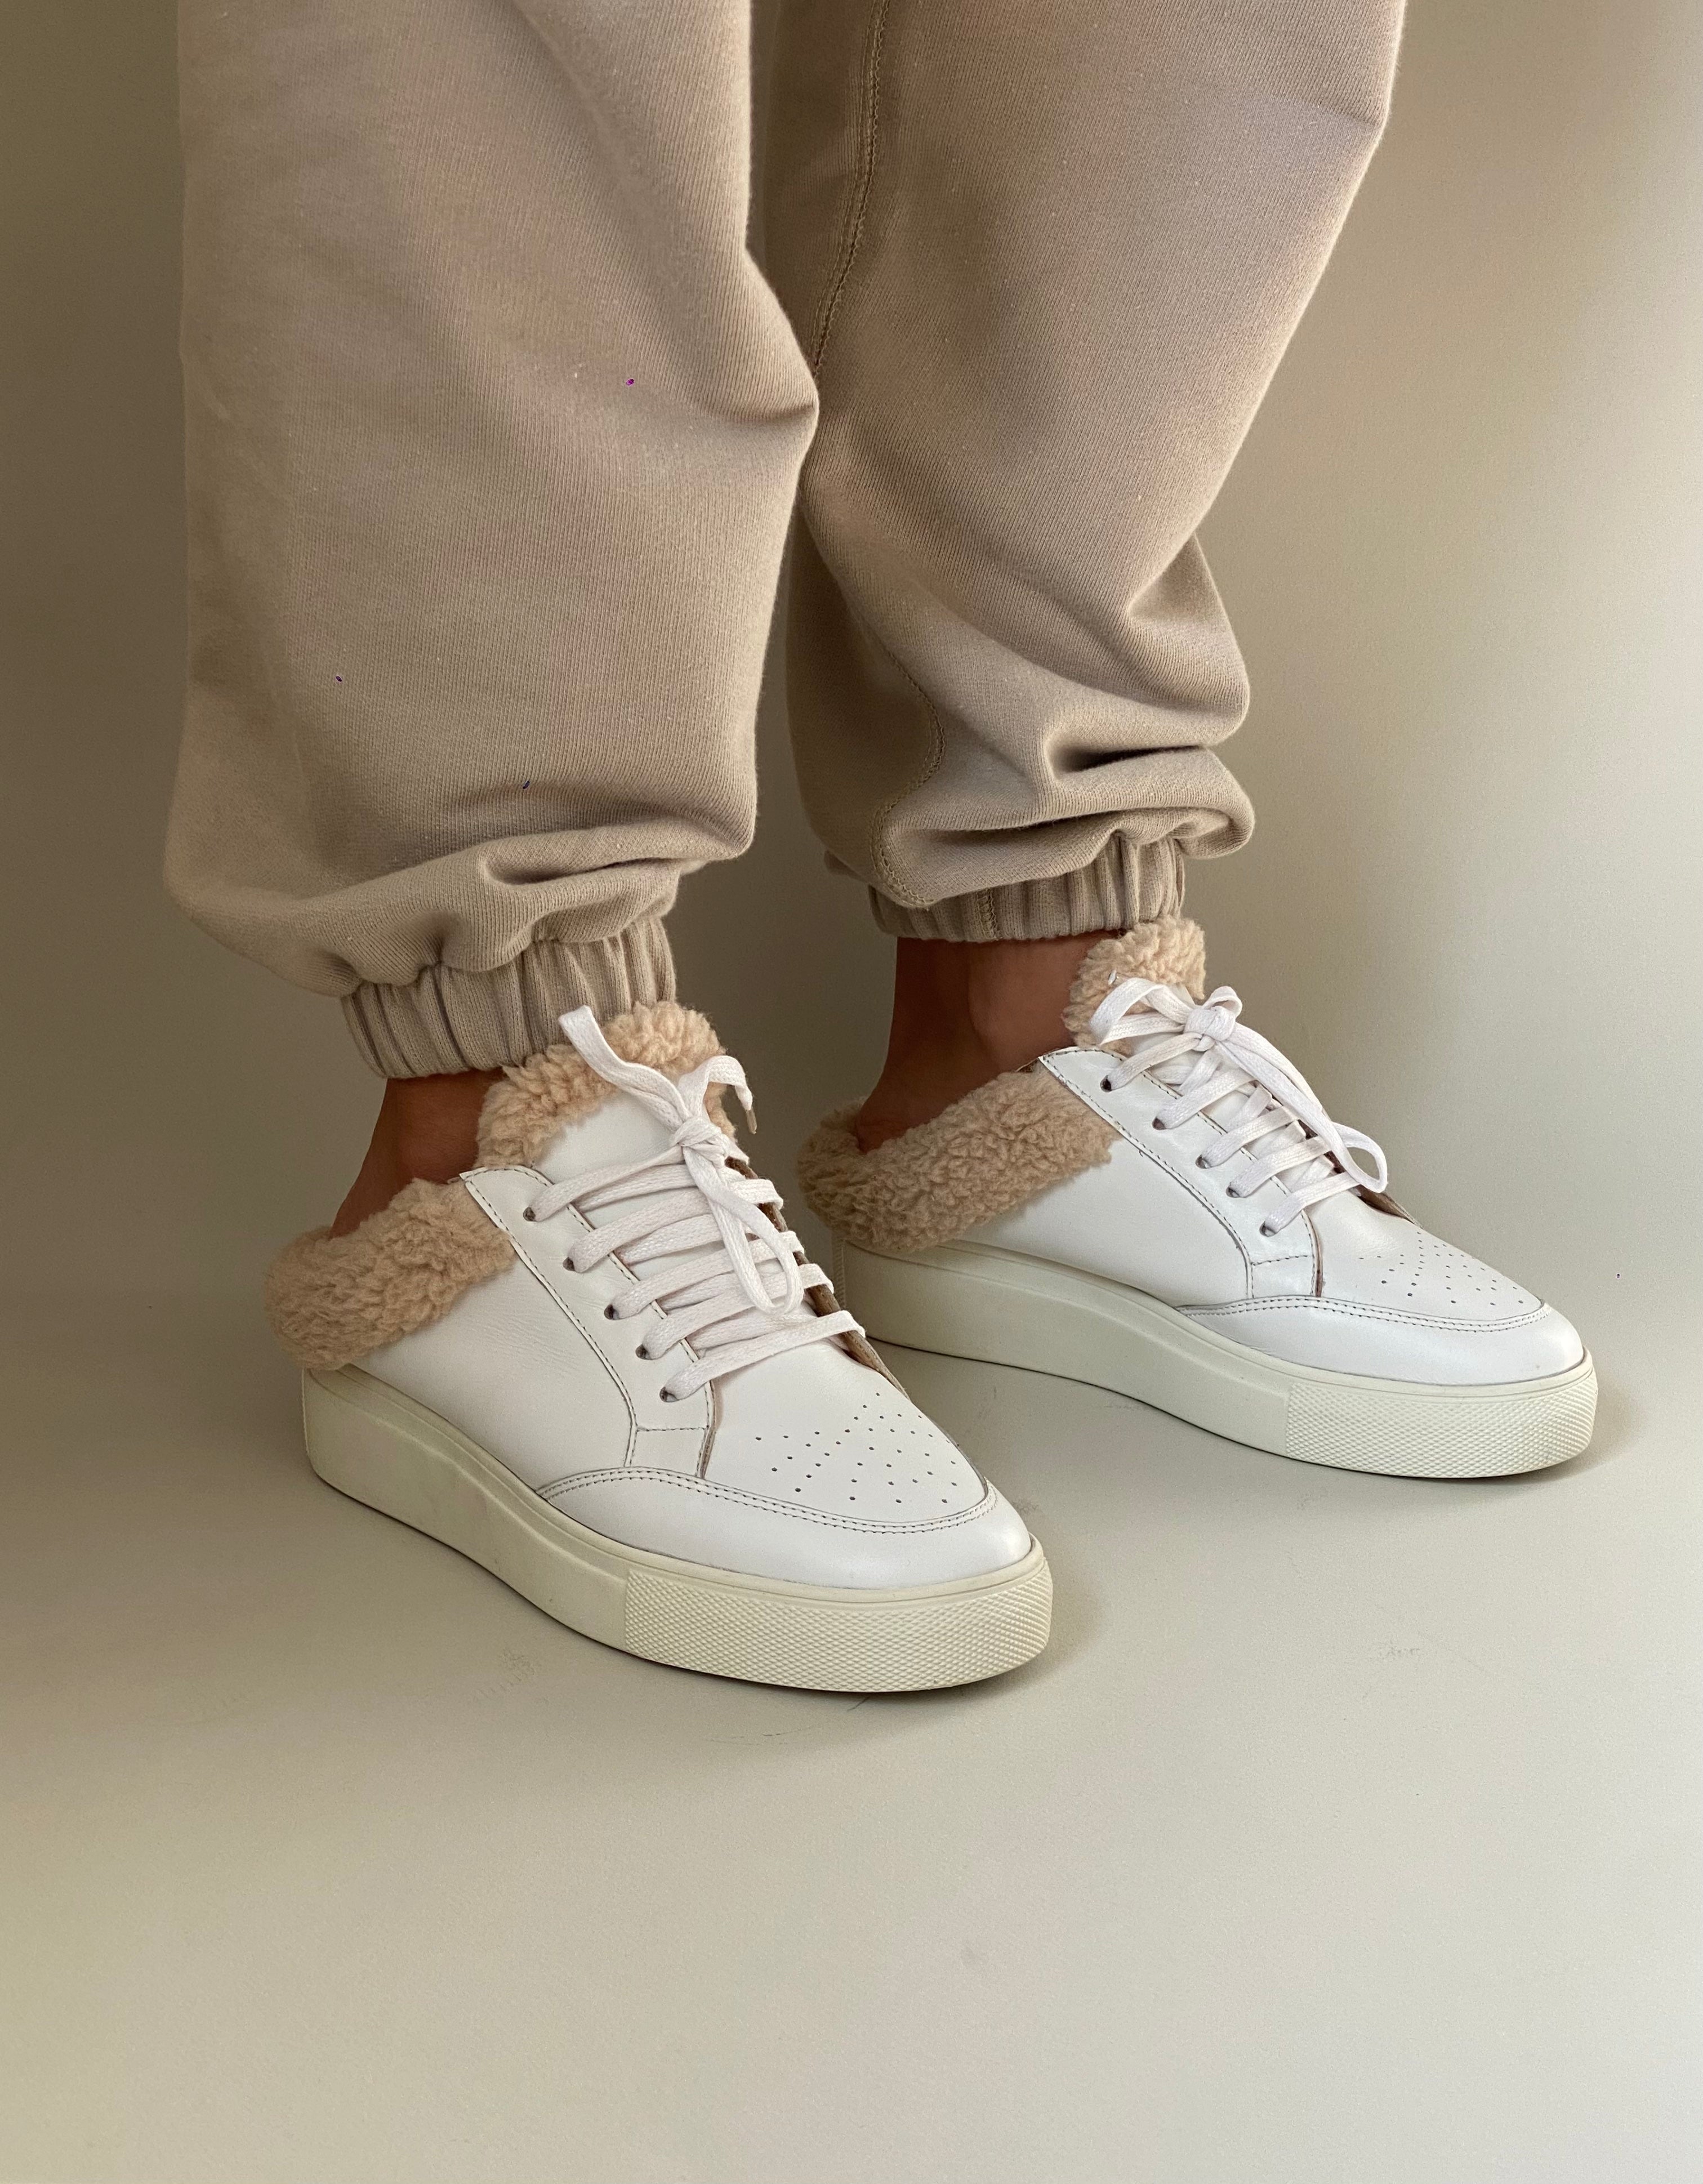 Marcy Retro Shearling Mule Sneakers